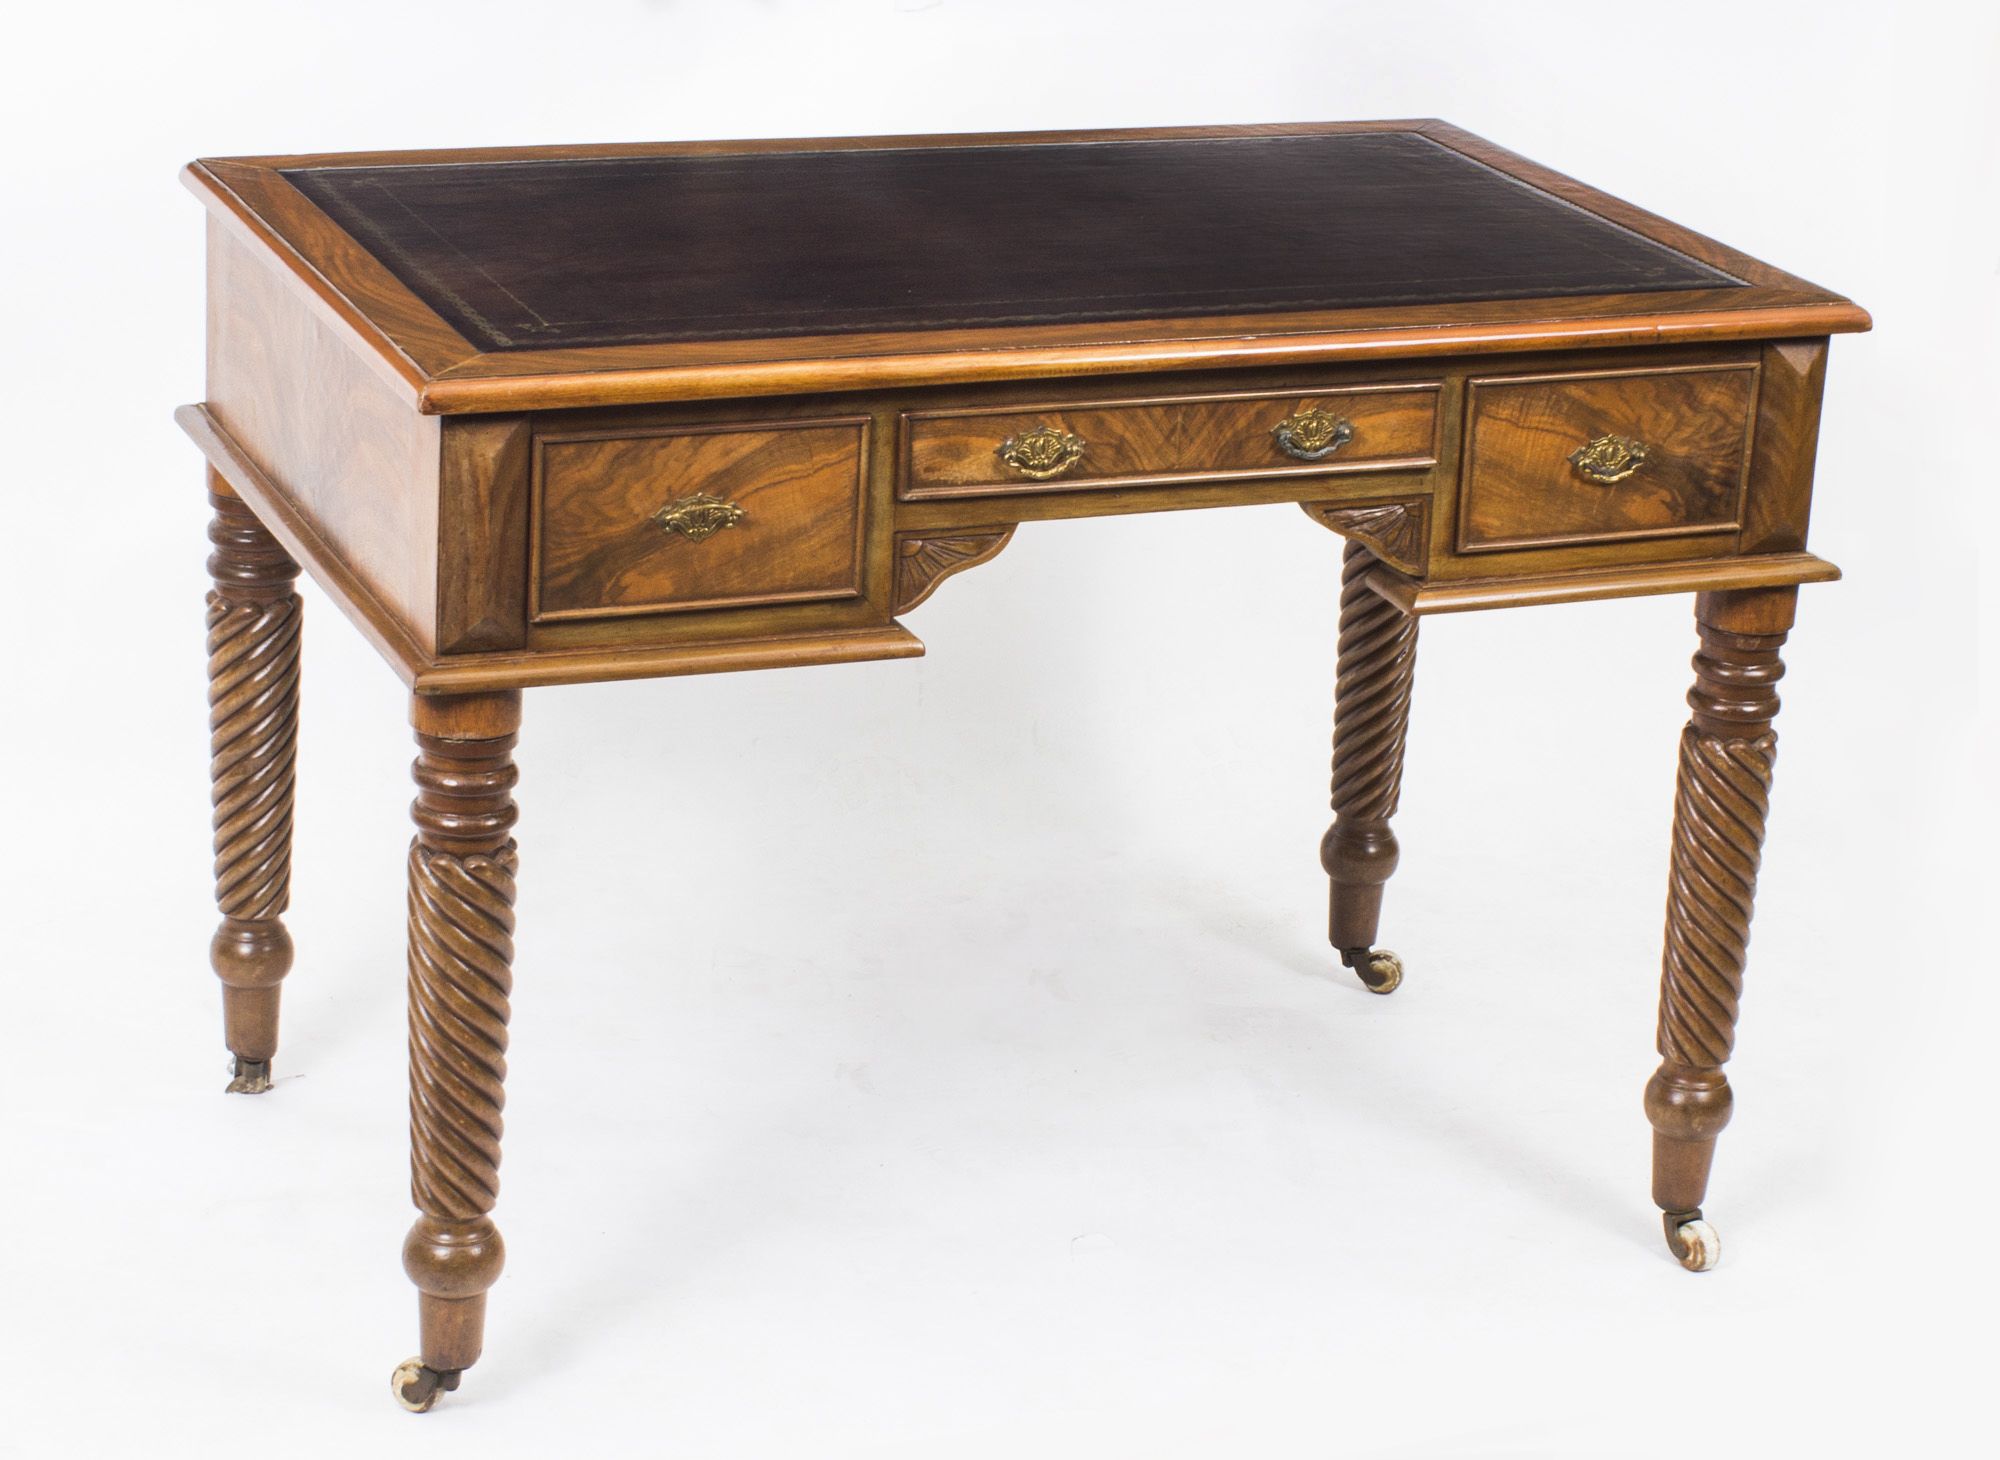 Antique Figured Walnut Writing Table Desk C (View 12 of 15)